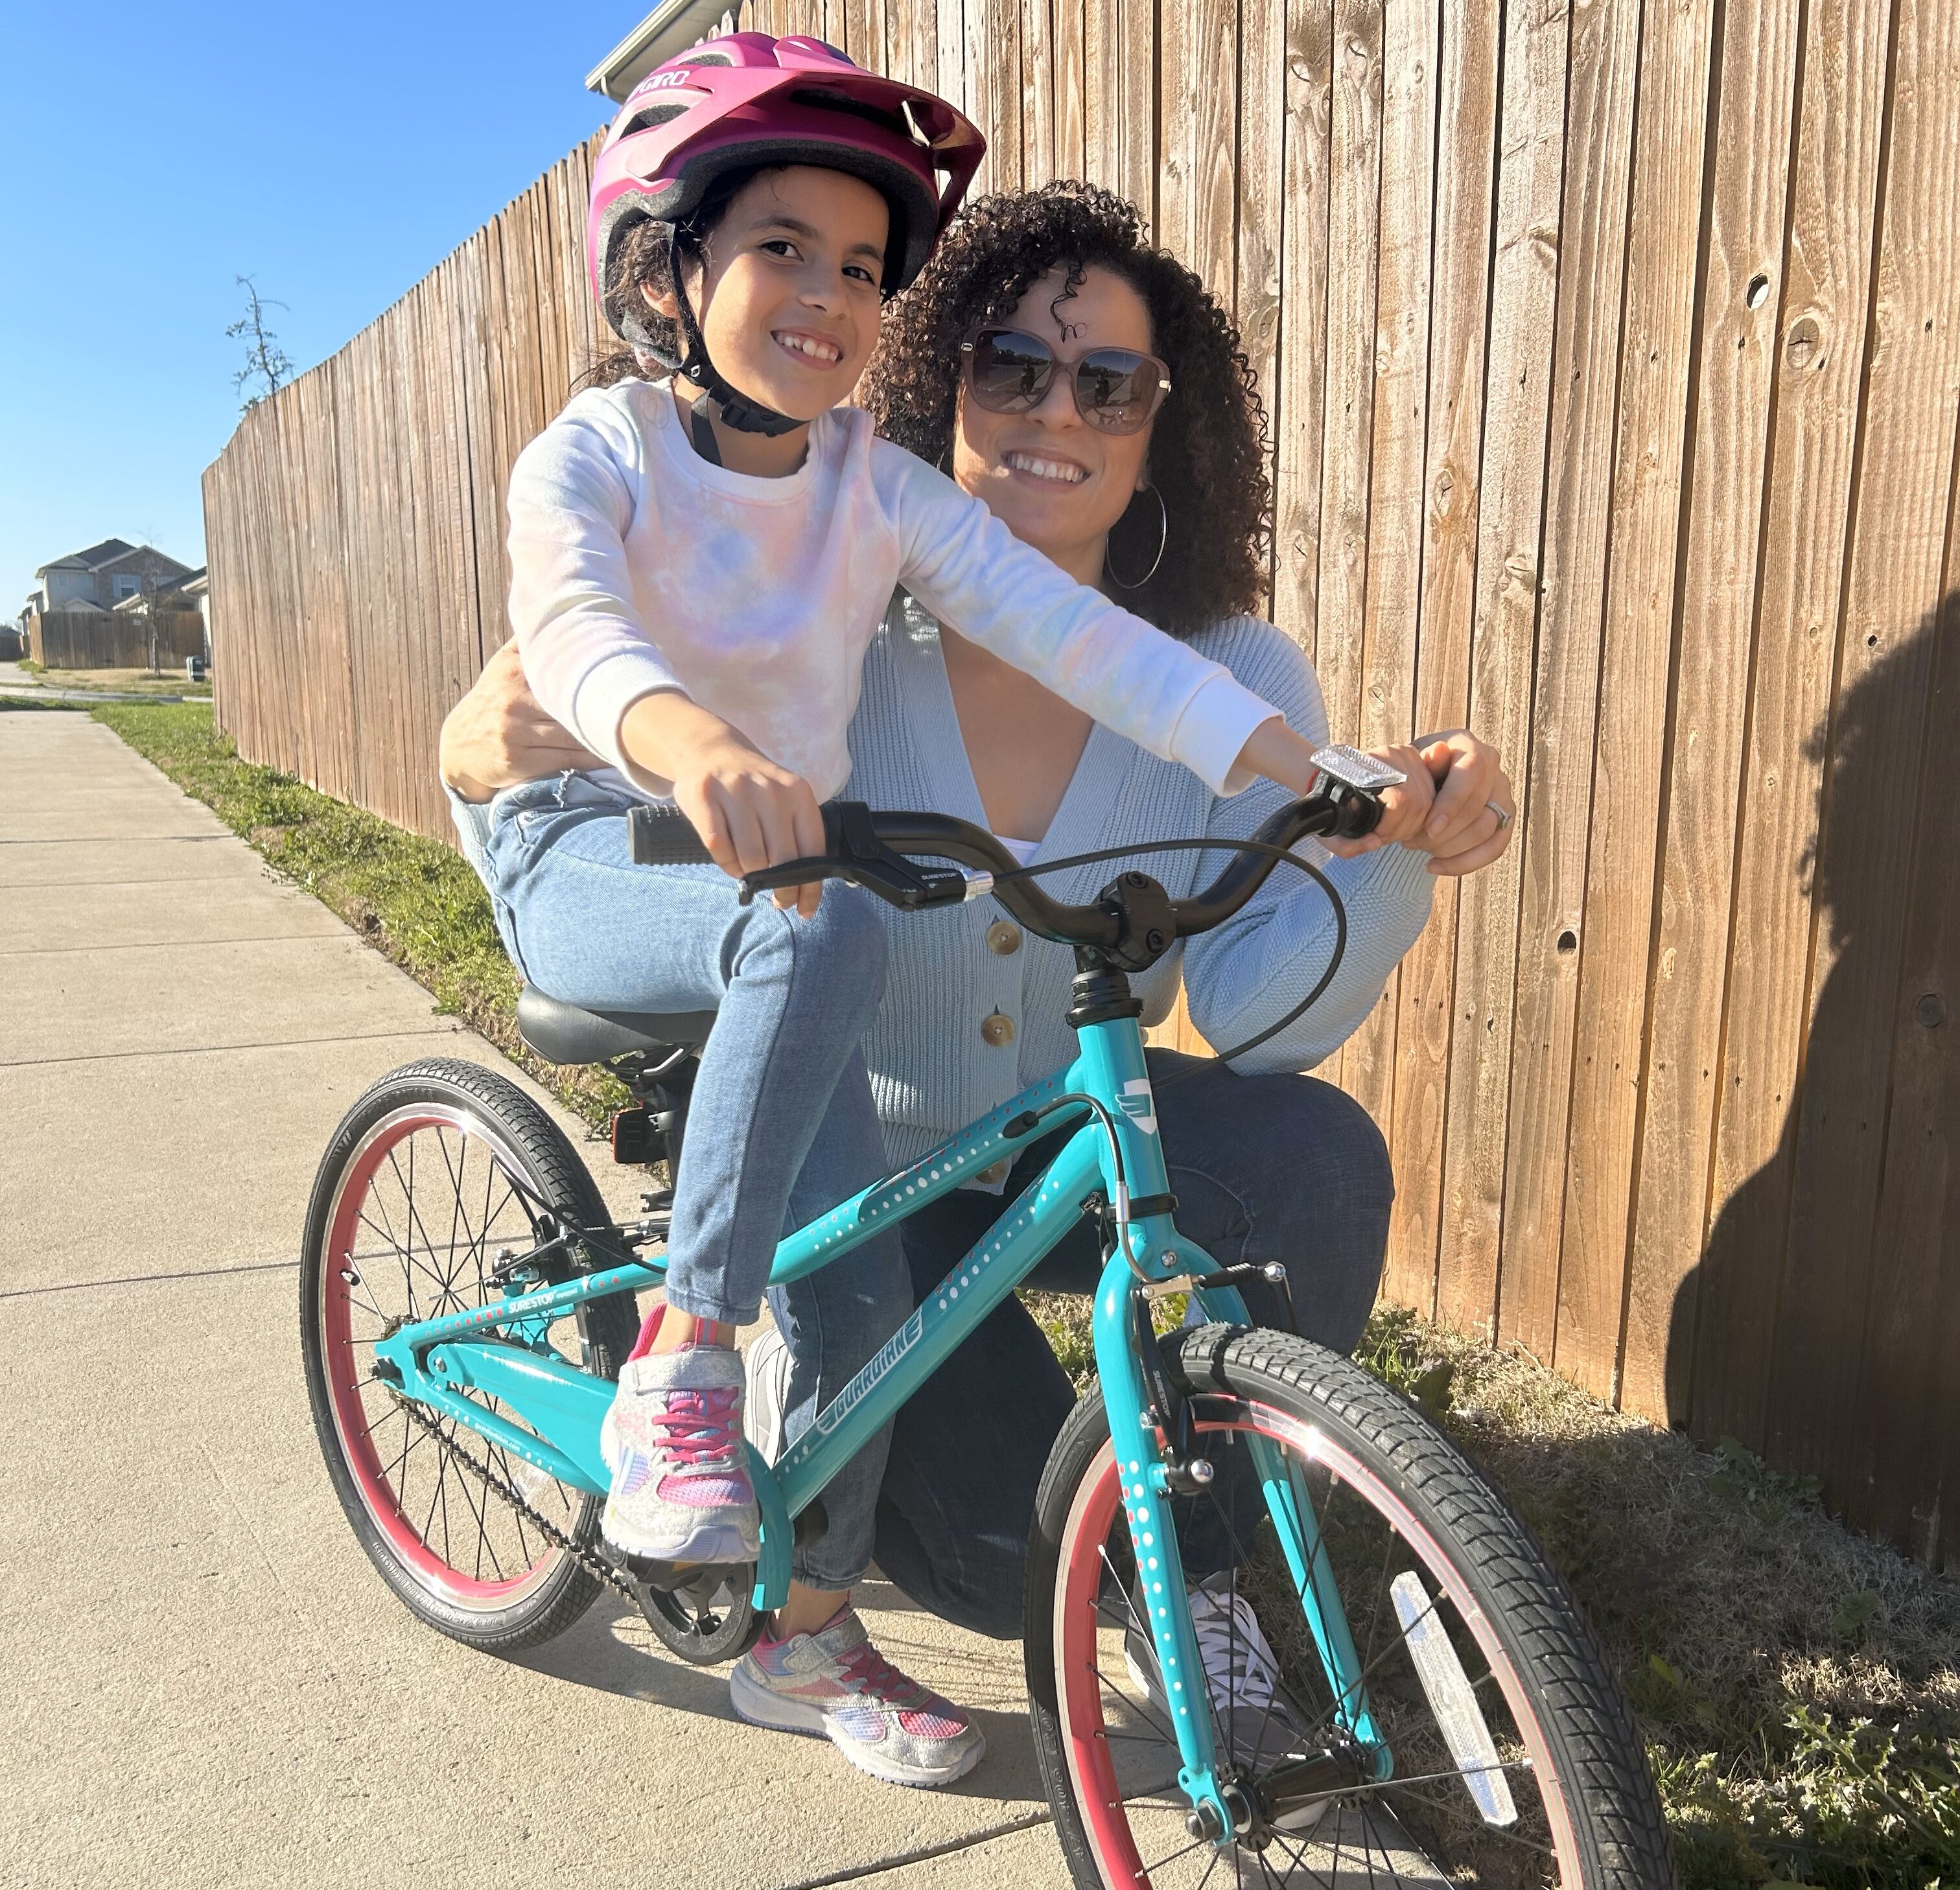 What Are Real Parents Are Saying About This Top-Rated Kids’ Bike? Find Out Here